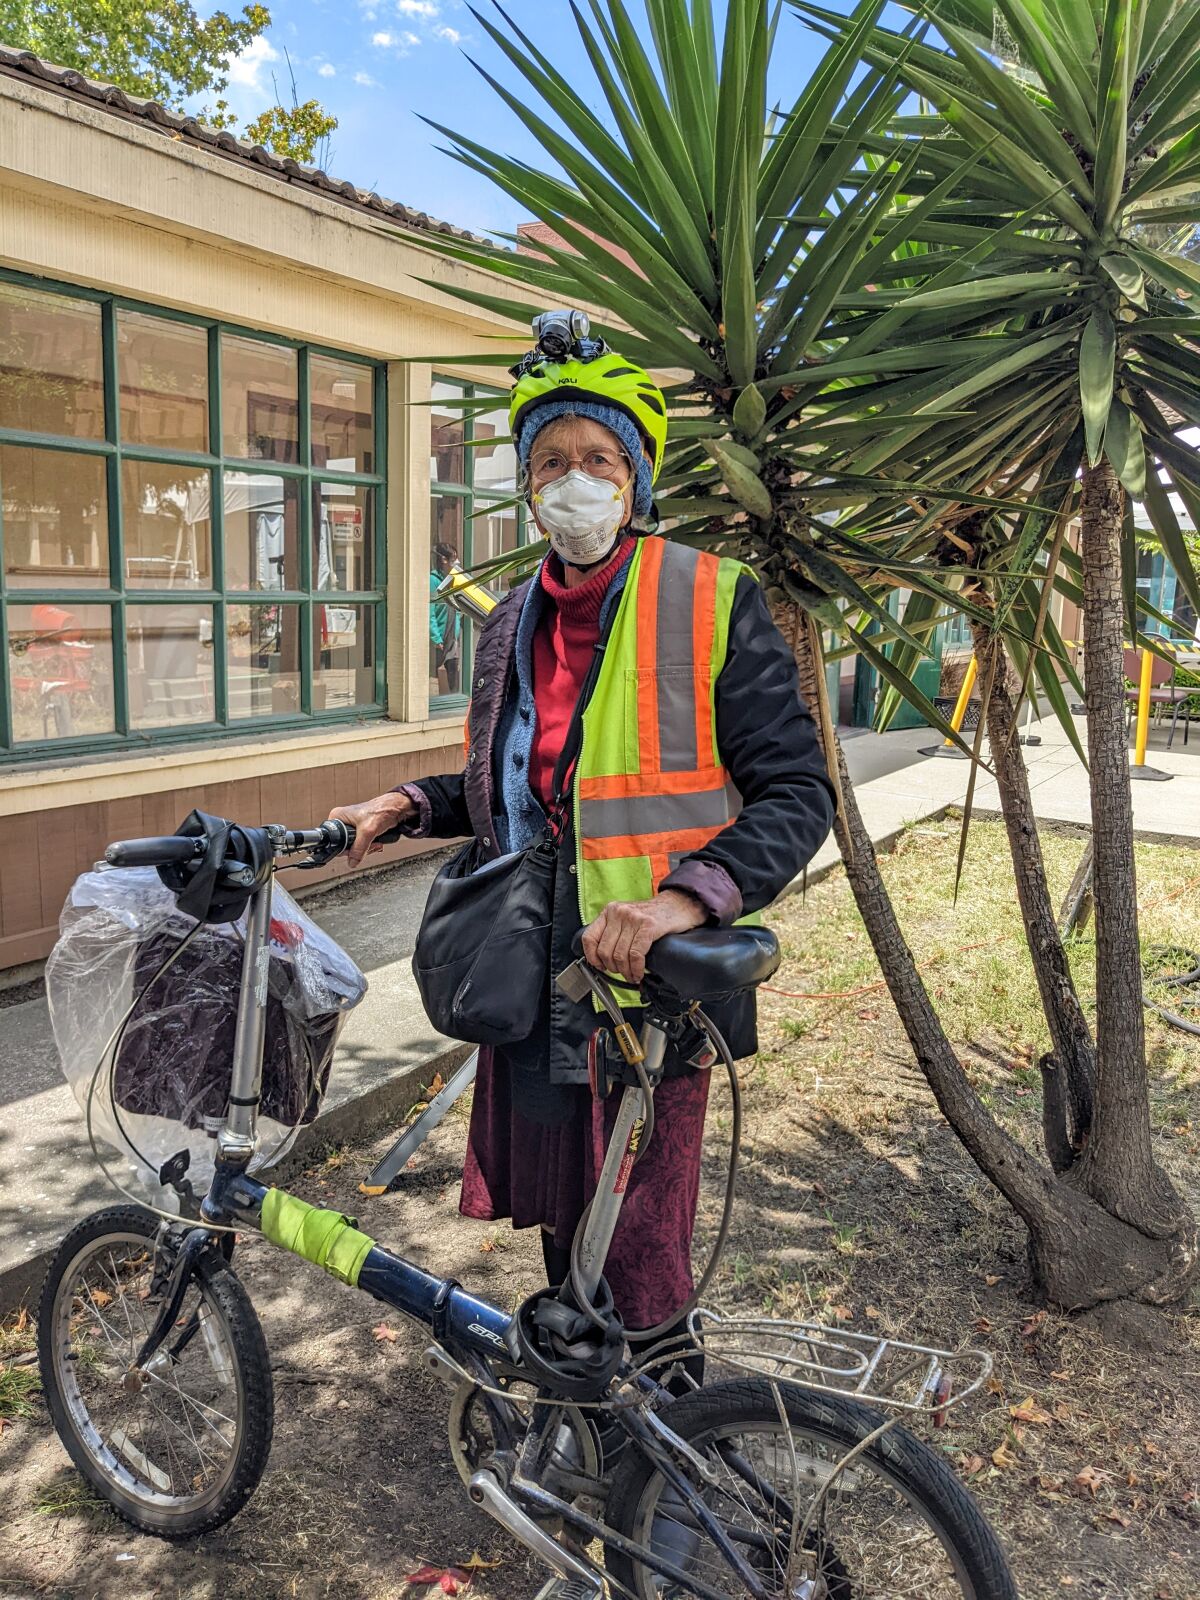 Mary White, wearing a snow cap and reflector vest, stands next to her collapsible bicycle.